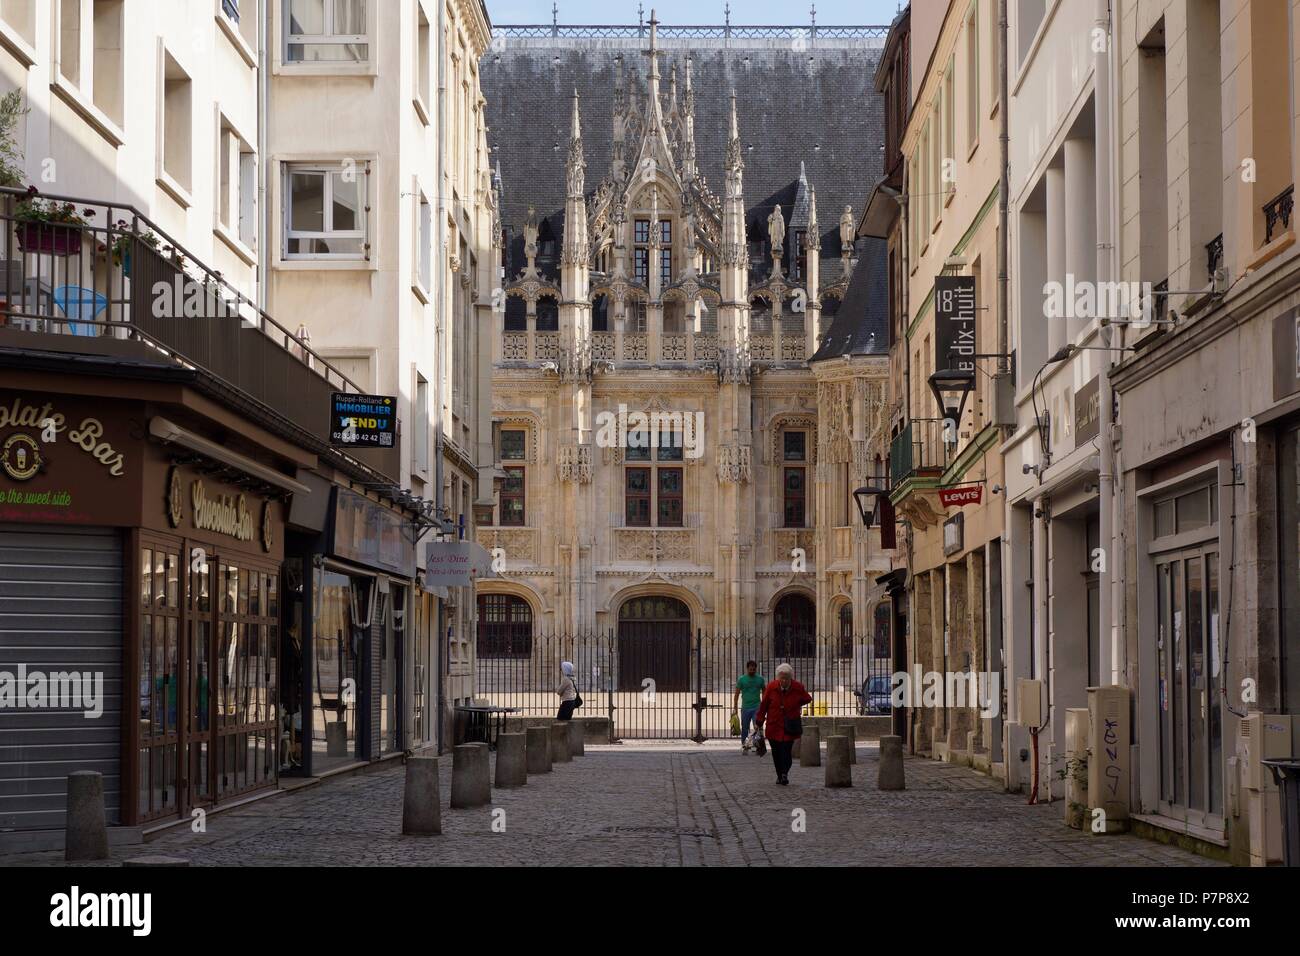 Rouen Castle High Resolution Stock Photography and Images - Alamy